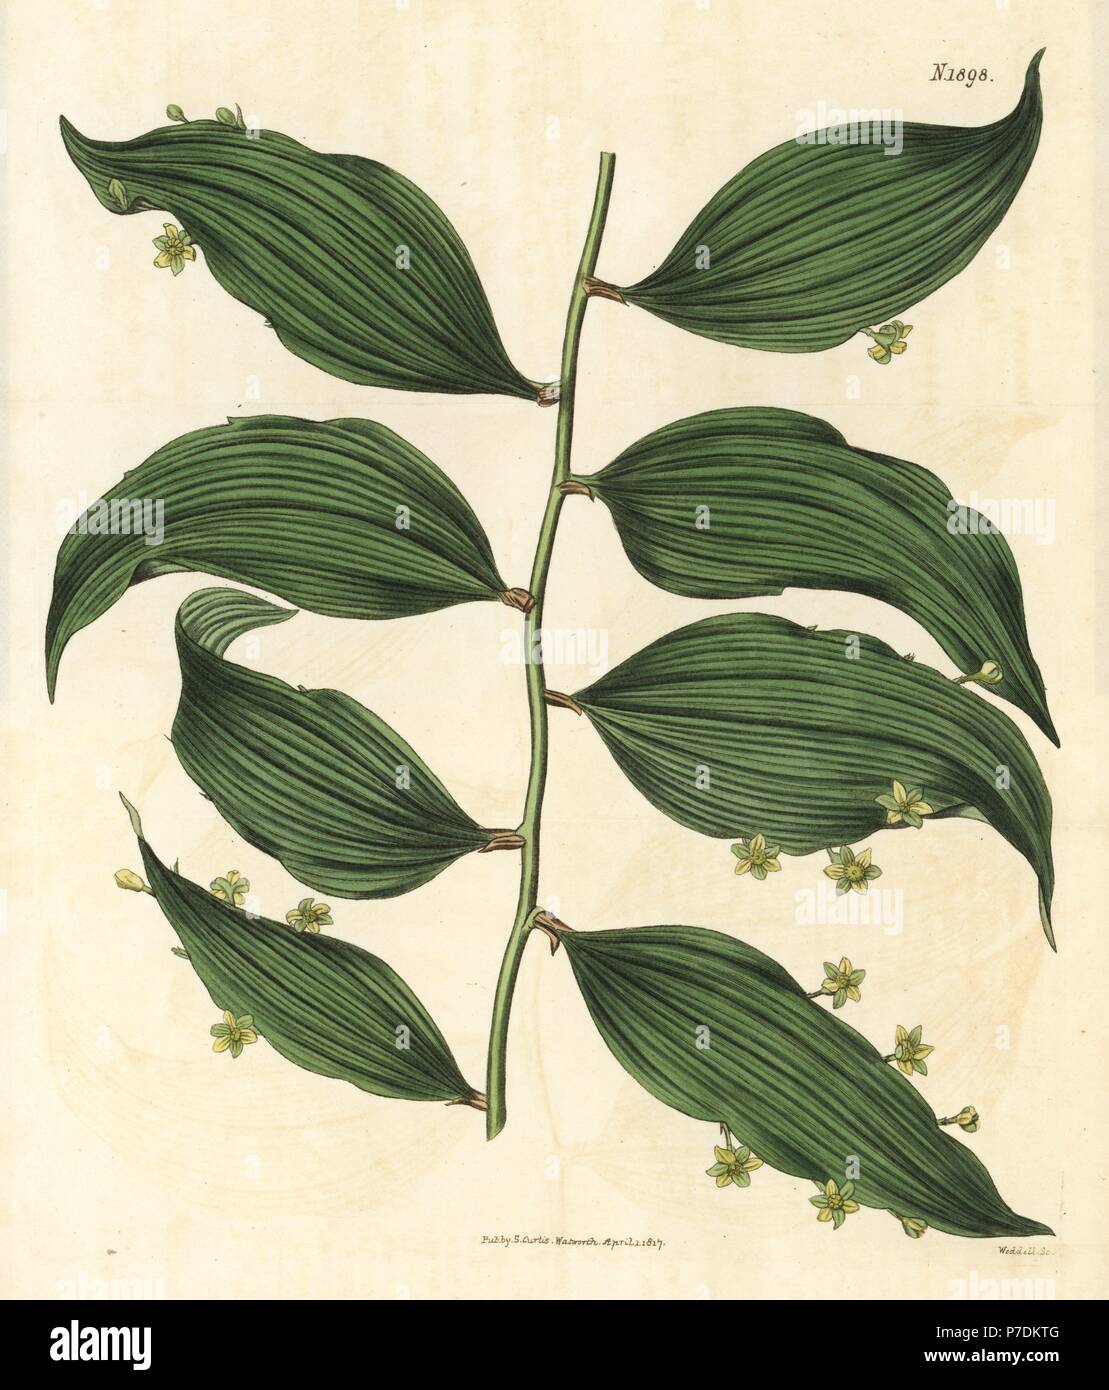 Climbing's butcher's broom, Semele androgyna (Ruscus androgynus). Handcoloured botanical engraving from John Sims' Curtis's Botanical Magazine, Couchman, London, 1816. Stock Photo